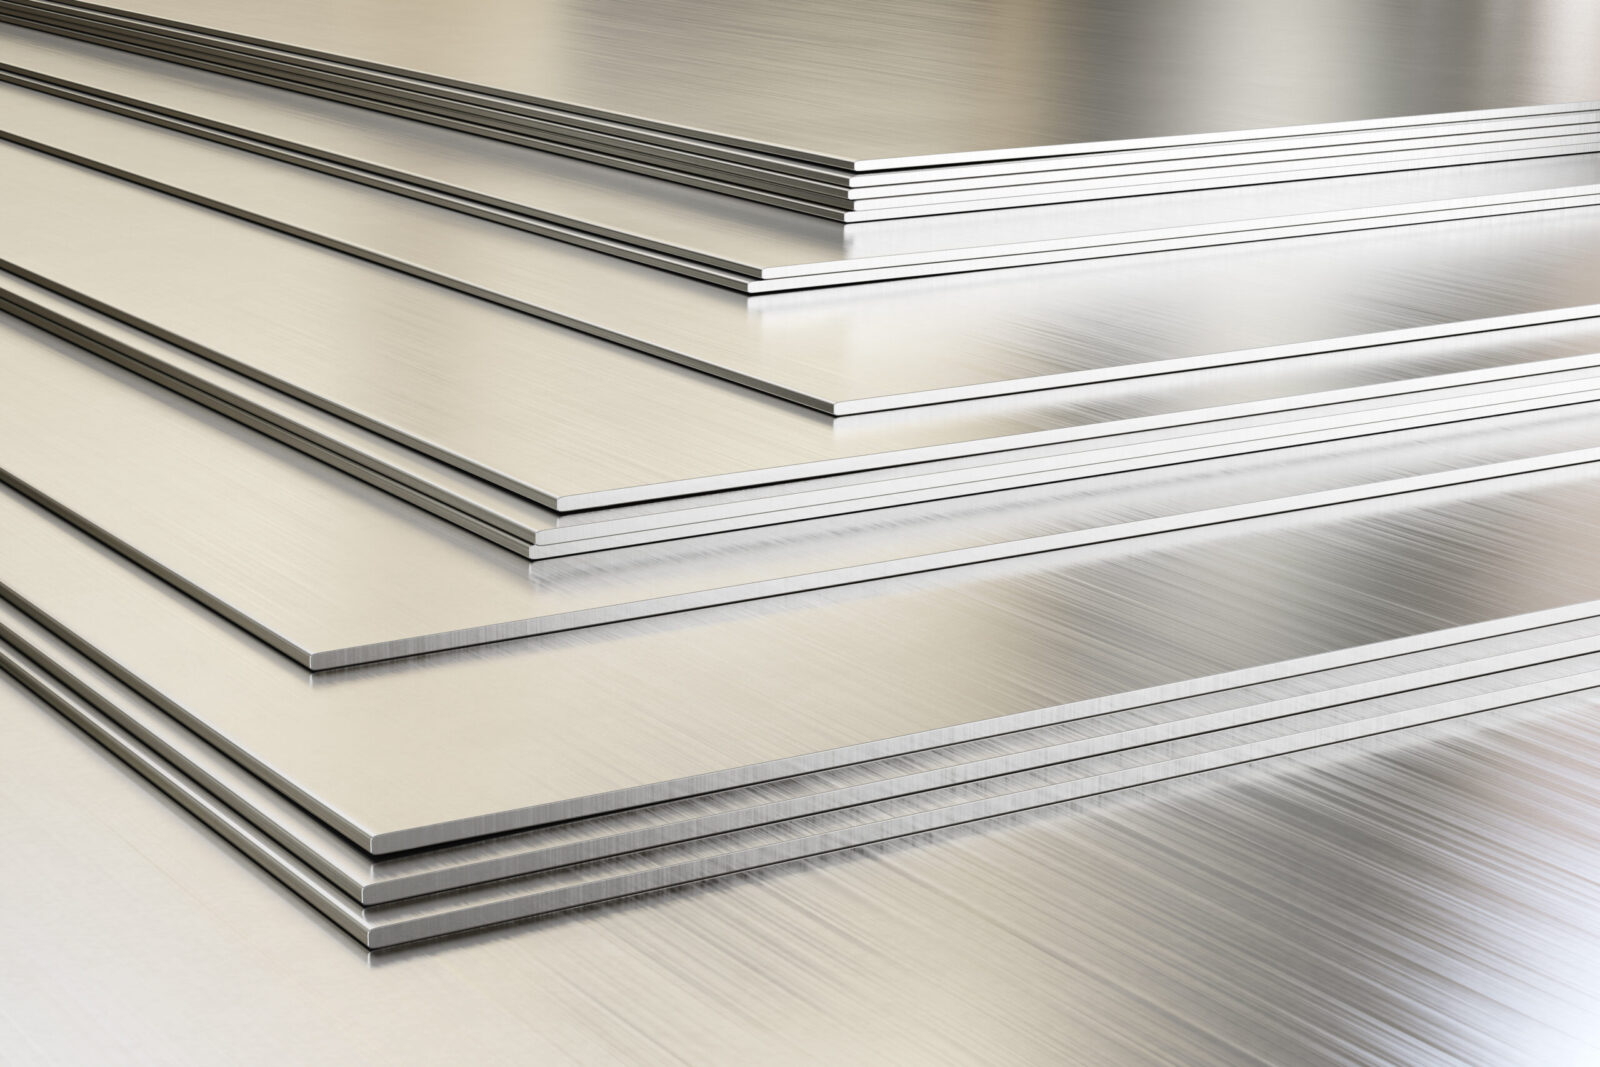 Plus Metals - AMS 5772 Sheet Suppliers in India